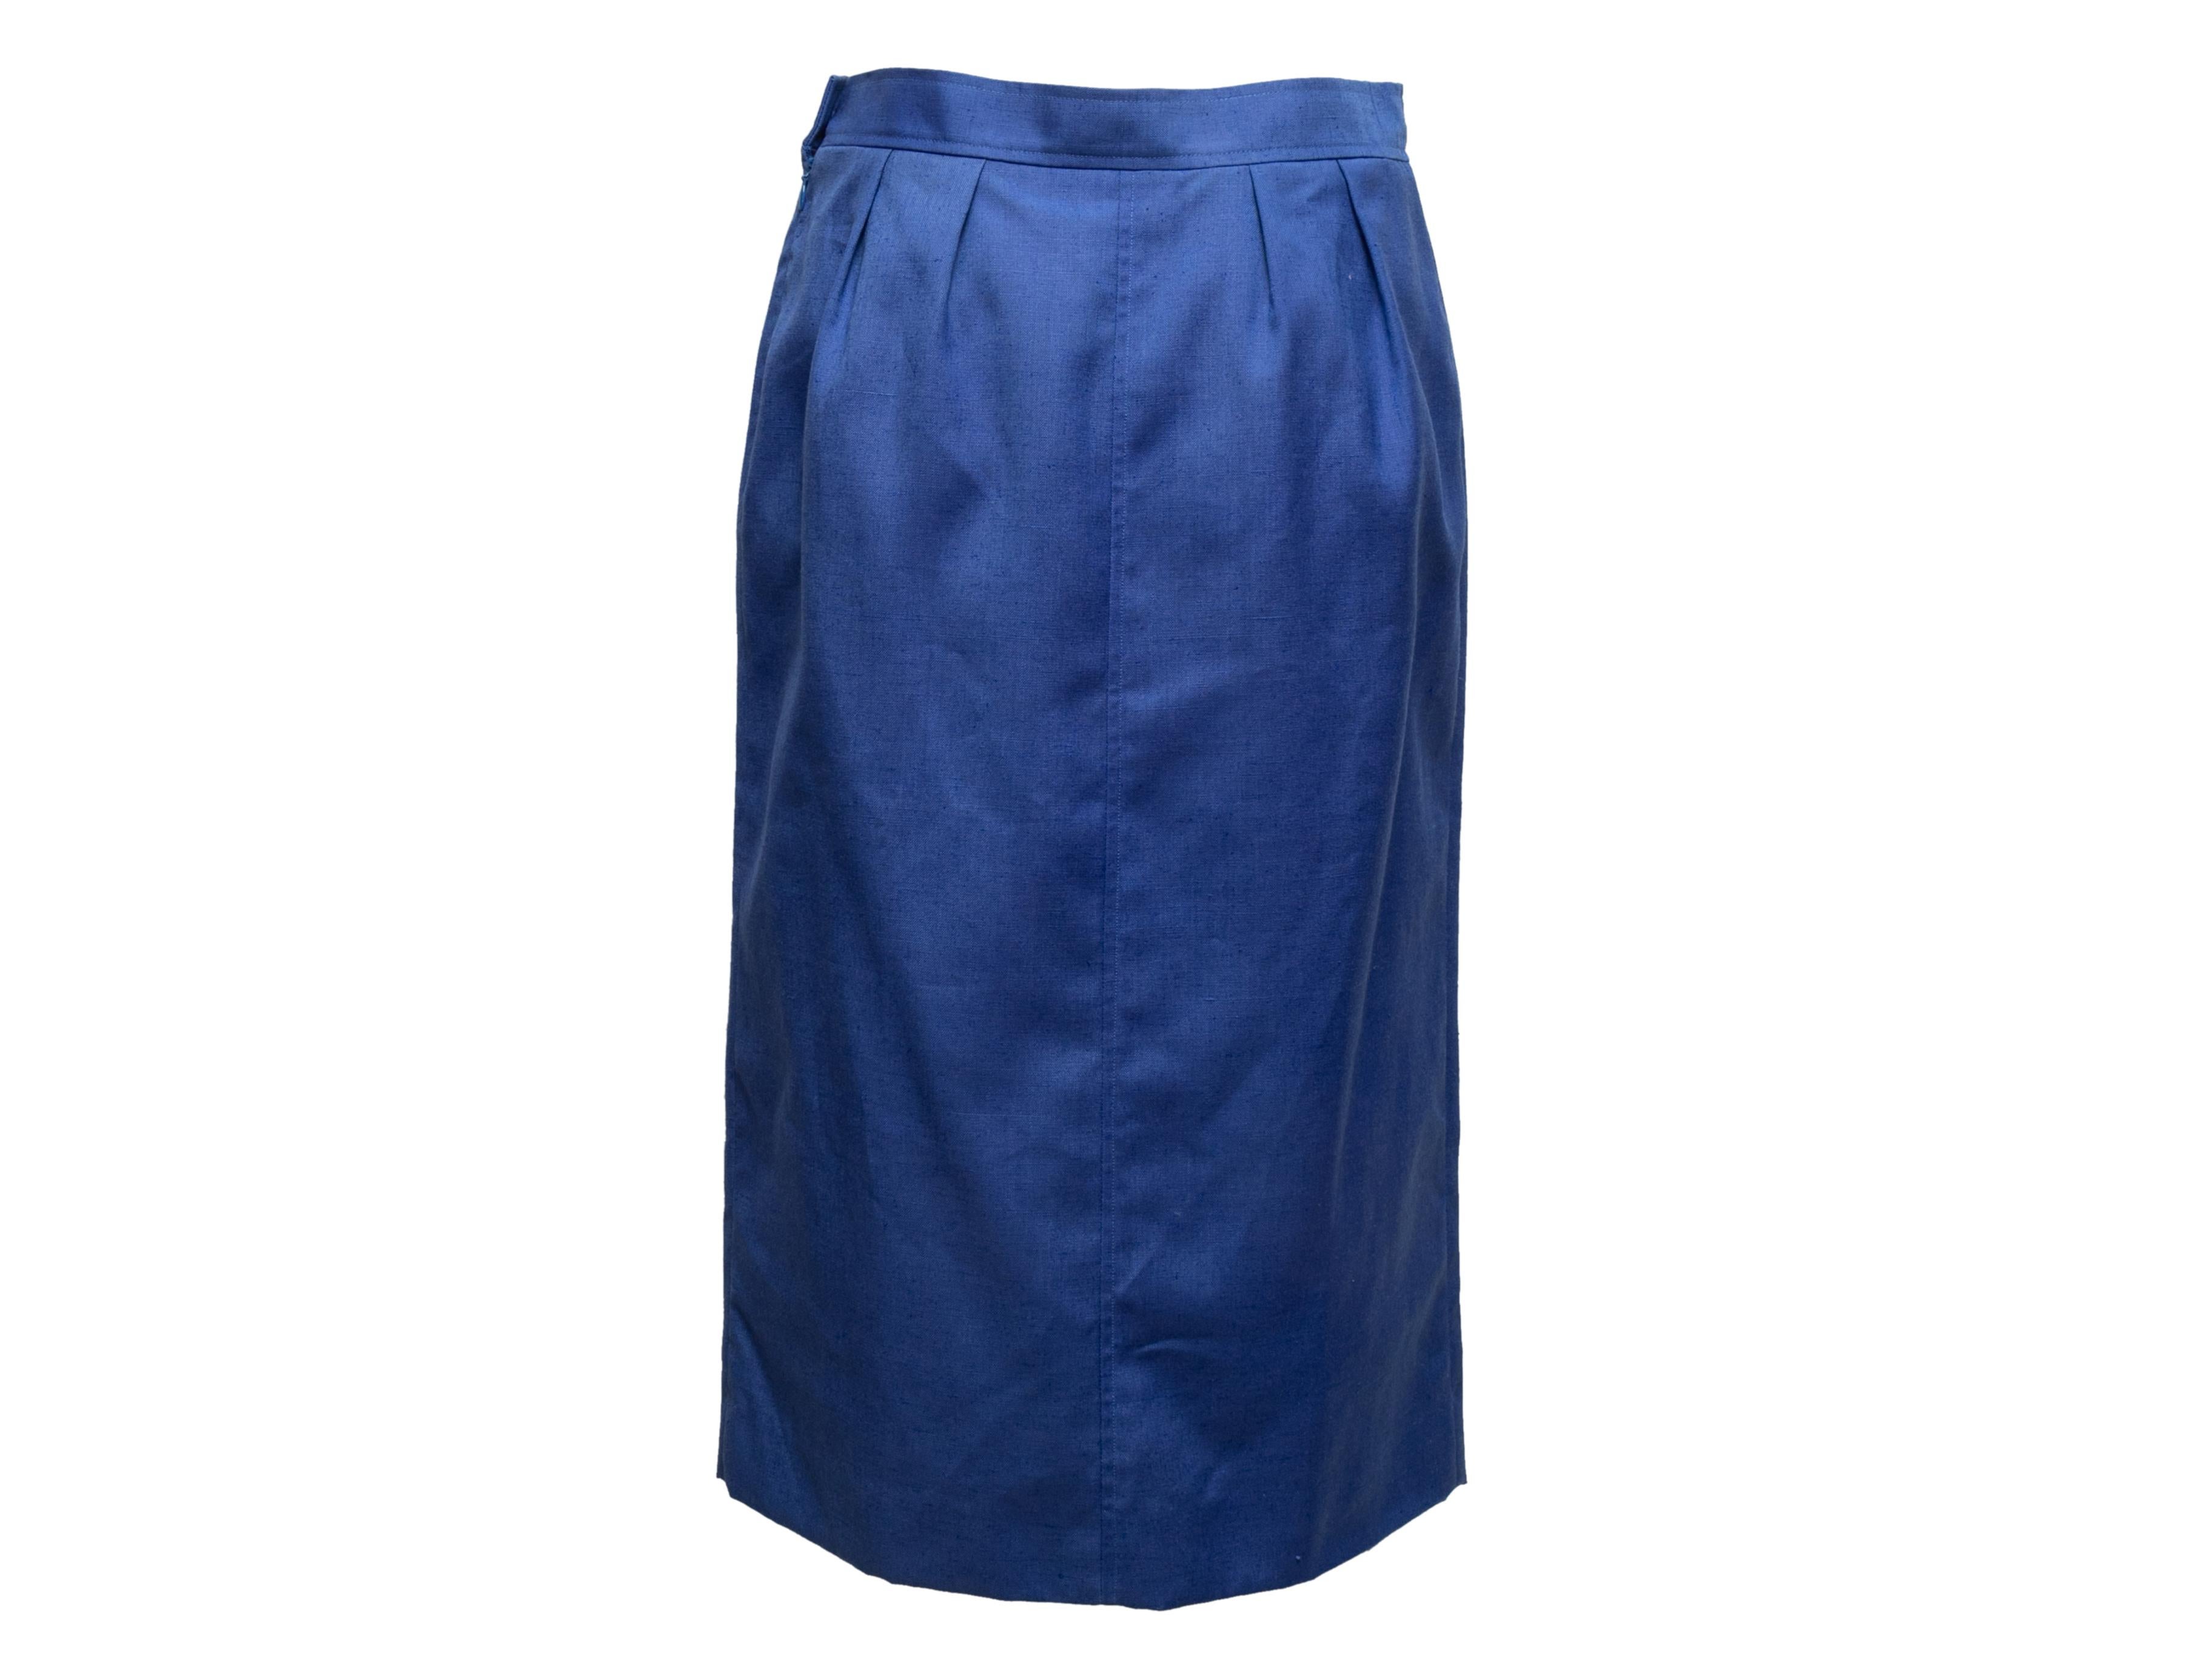 Vintage Blue Courreges Pencil Skirt Size US XS In Good Condition For Sale In New York, NY